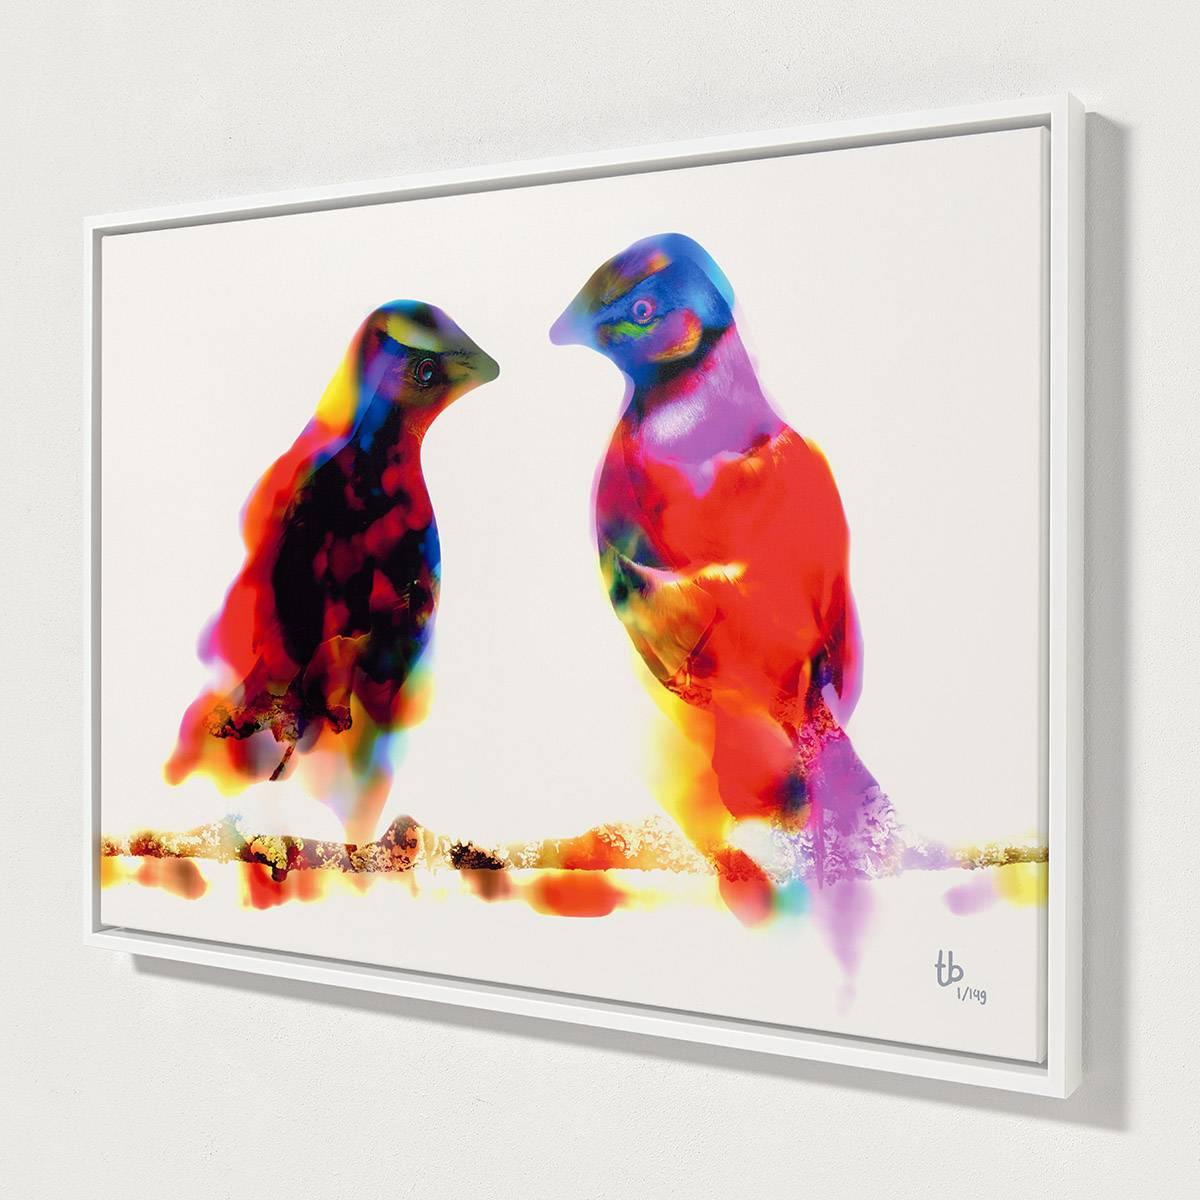 Two Birds - Framed Fine Art Limited Edition of 149 - Photograph by Thomas Bijen